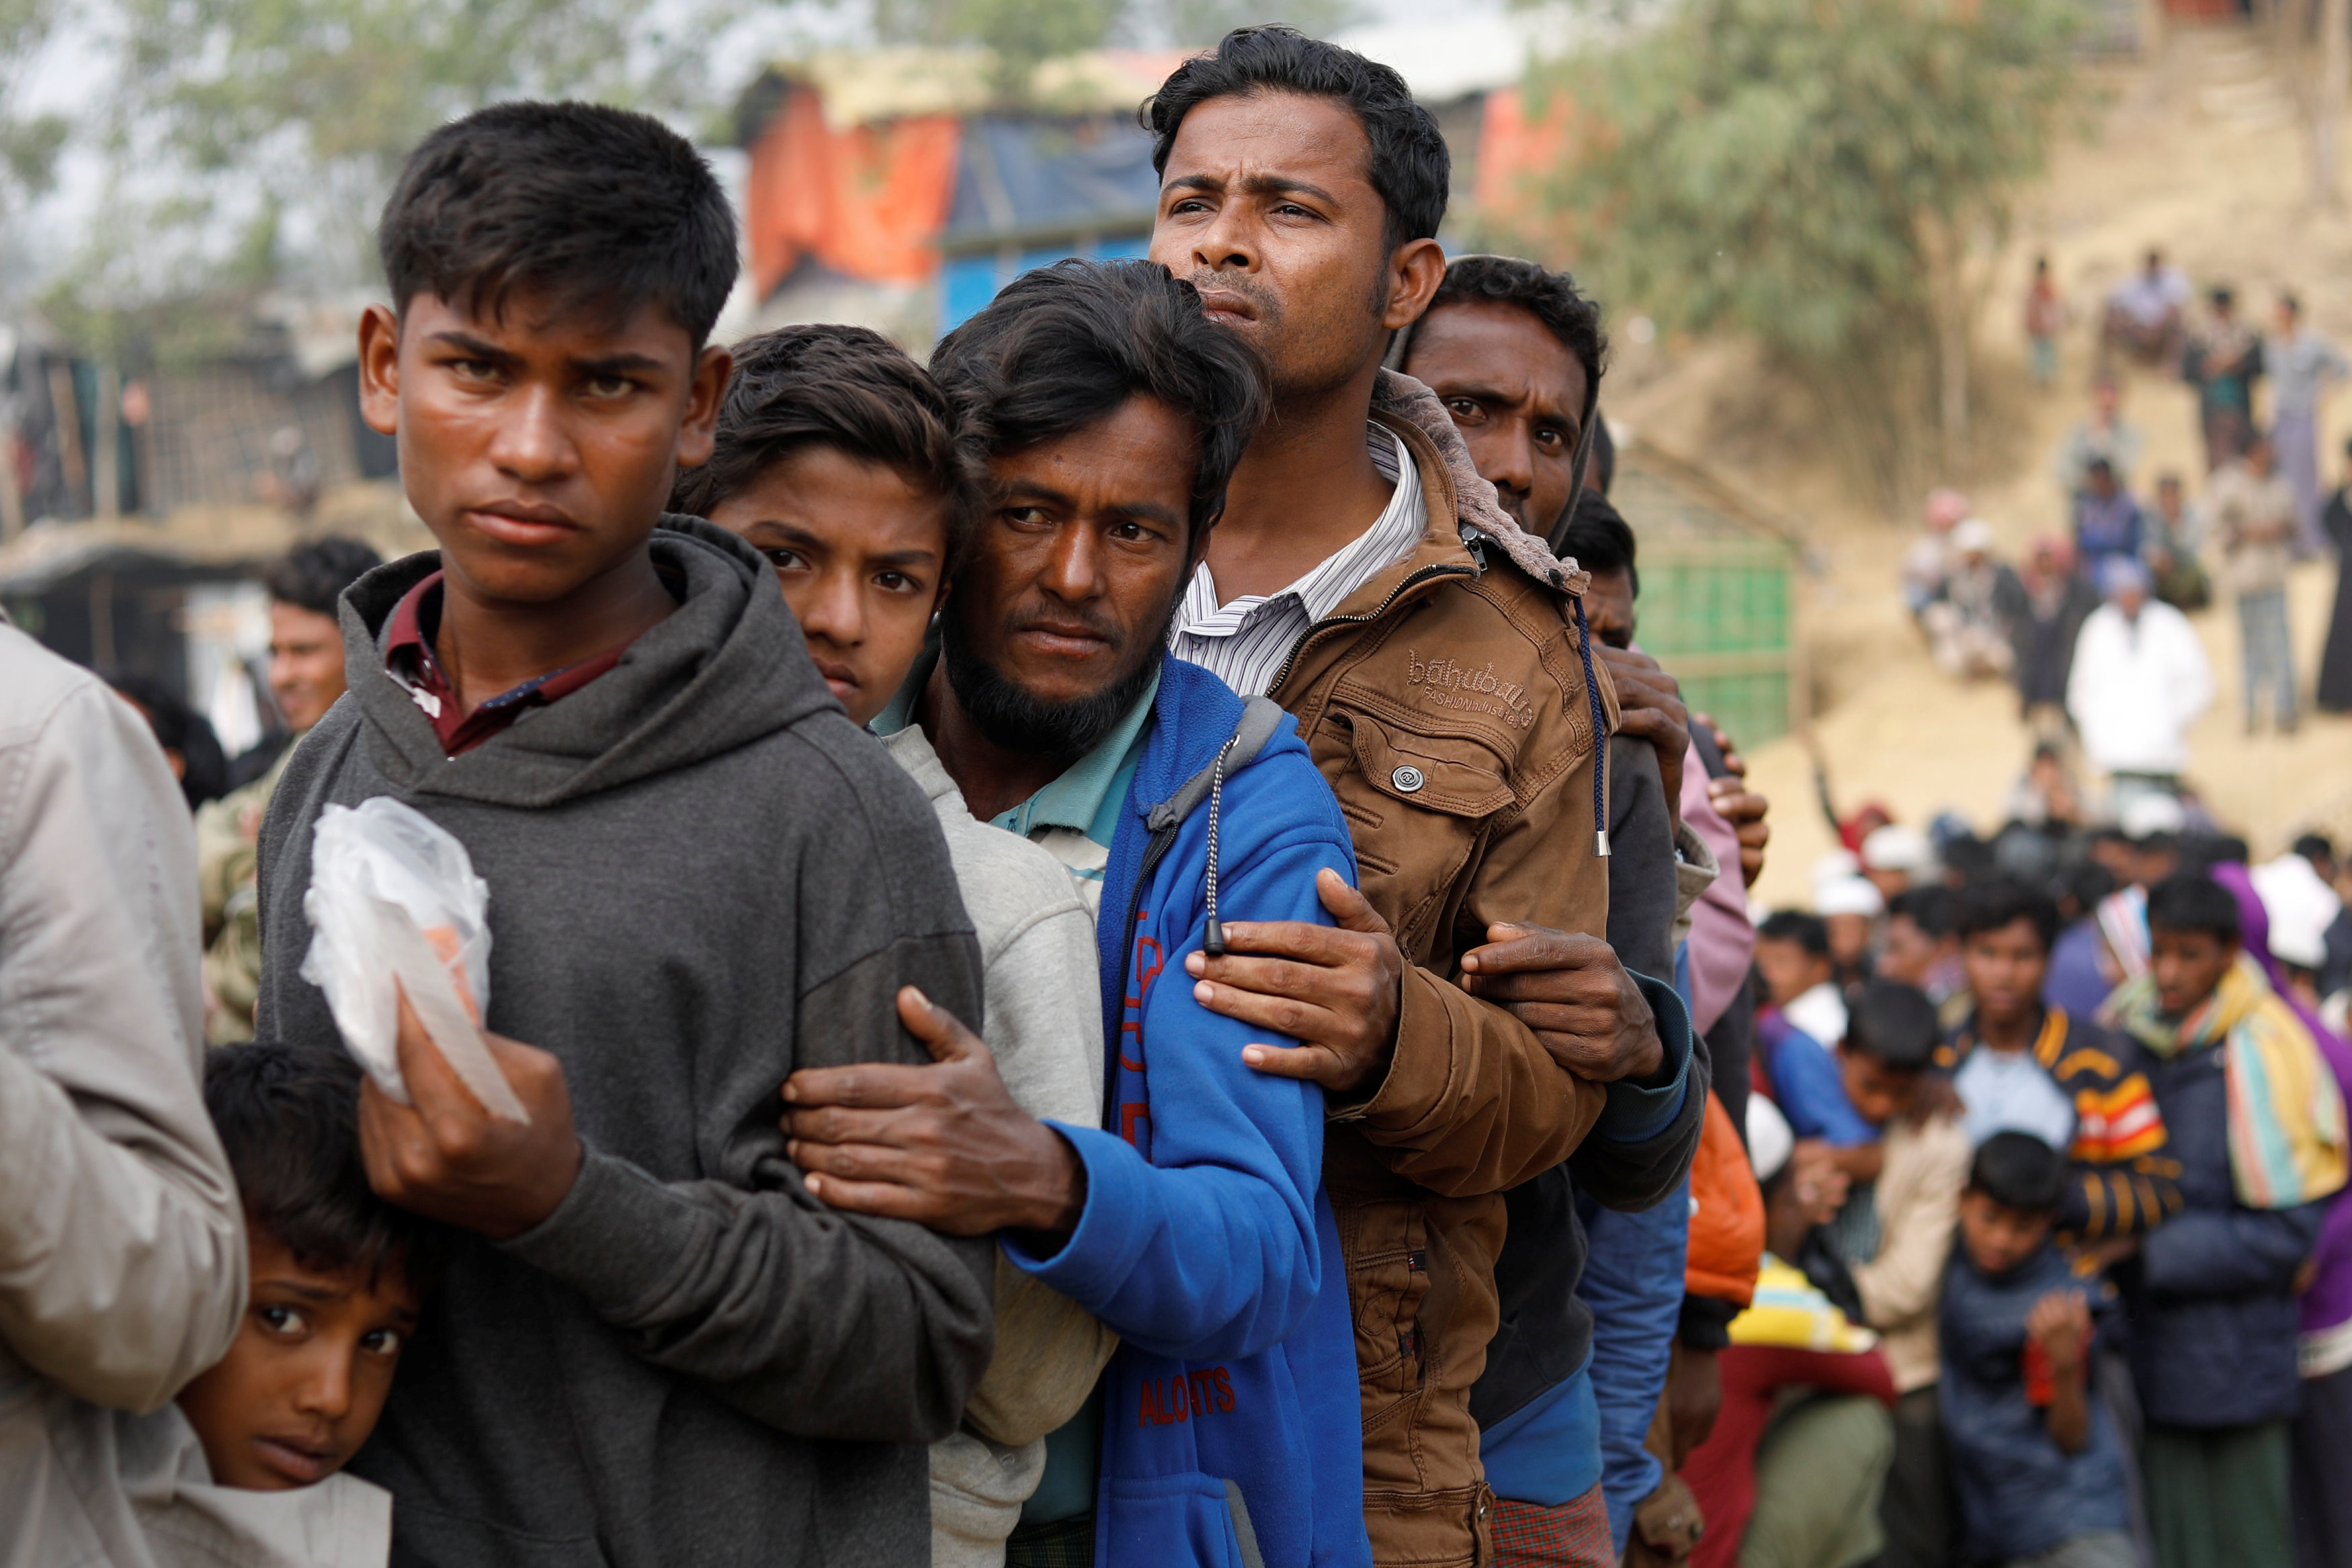 Rohingya refugees line up for daily essentials distribution at Balukhali camp, near Cox's Bazar, Bangladesh January 15, 2018. Photo: REUTERS